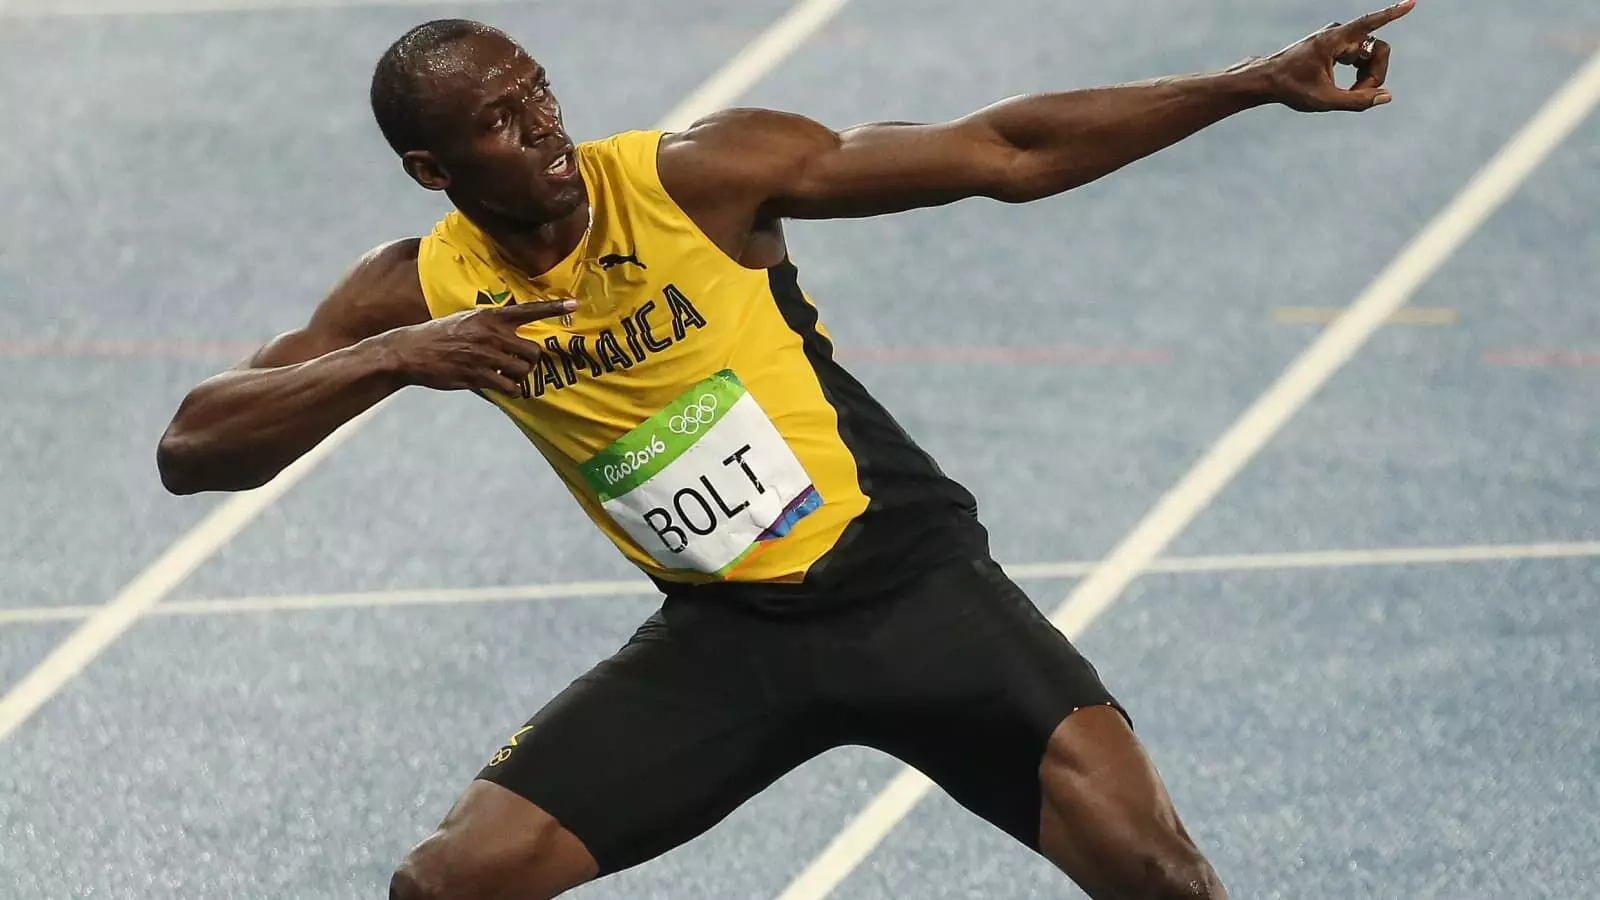 Usain Bolt 2016 Olympics: Speed, Age, Net Worth And Other Facts You Should  Know About The World's Fastest Man | IBTimes